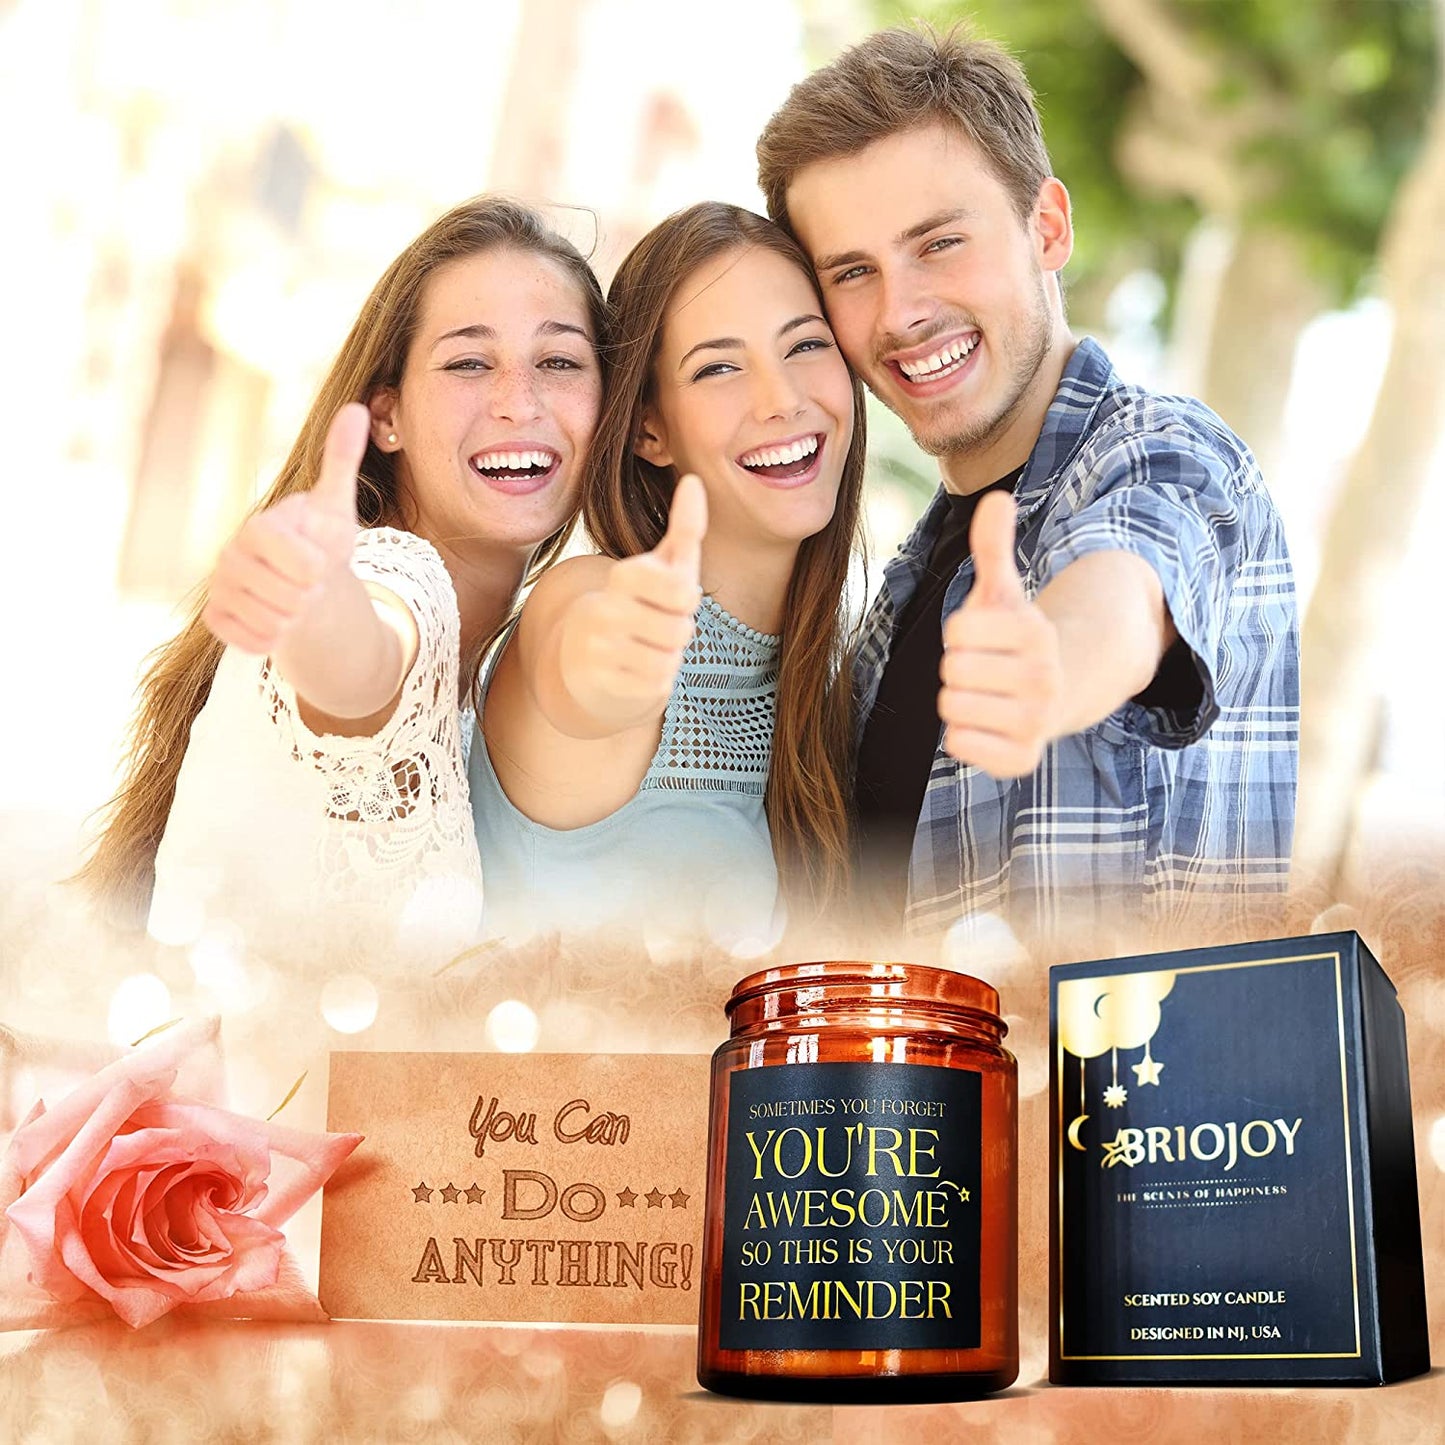 Two women and a guy are giving their thumbs up to the camera. There is also a candle which has a quote printed on it which says, "Sometimes You Forget You’re Awesome So This Is Your Reminder.”